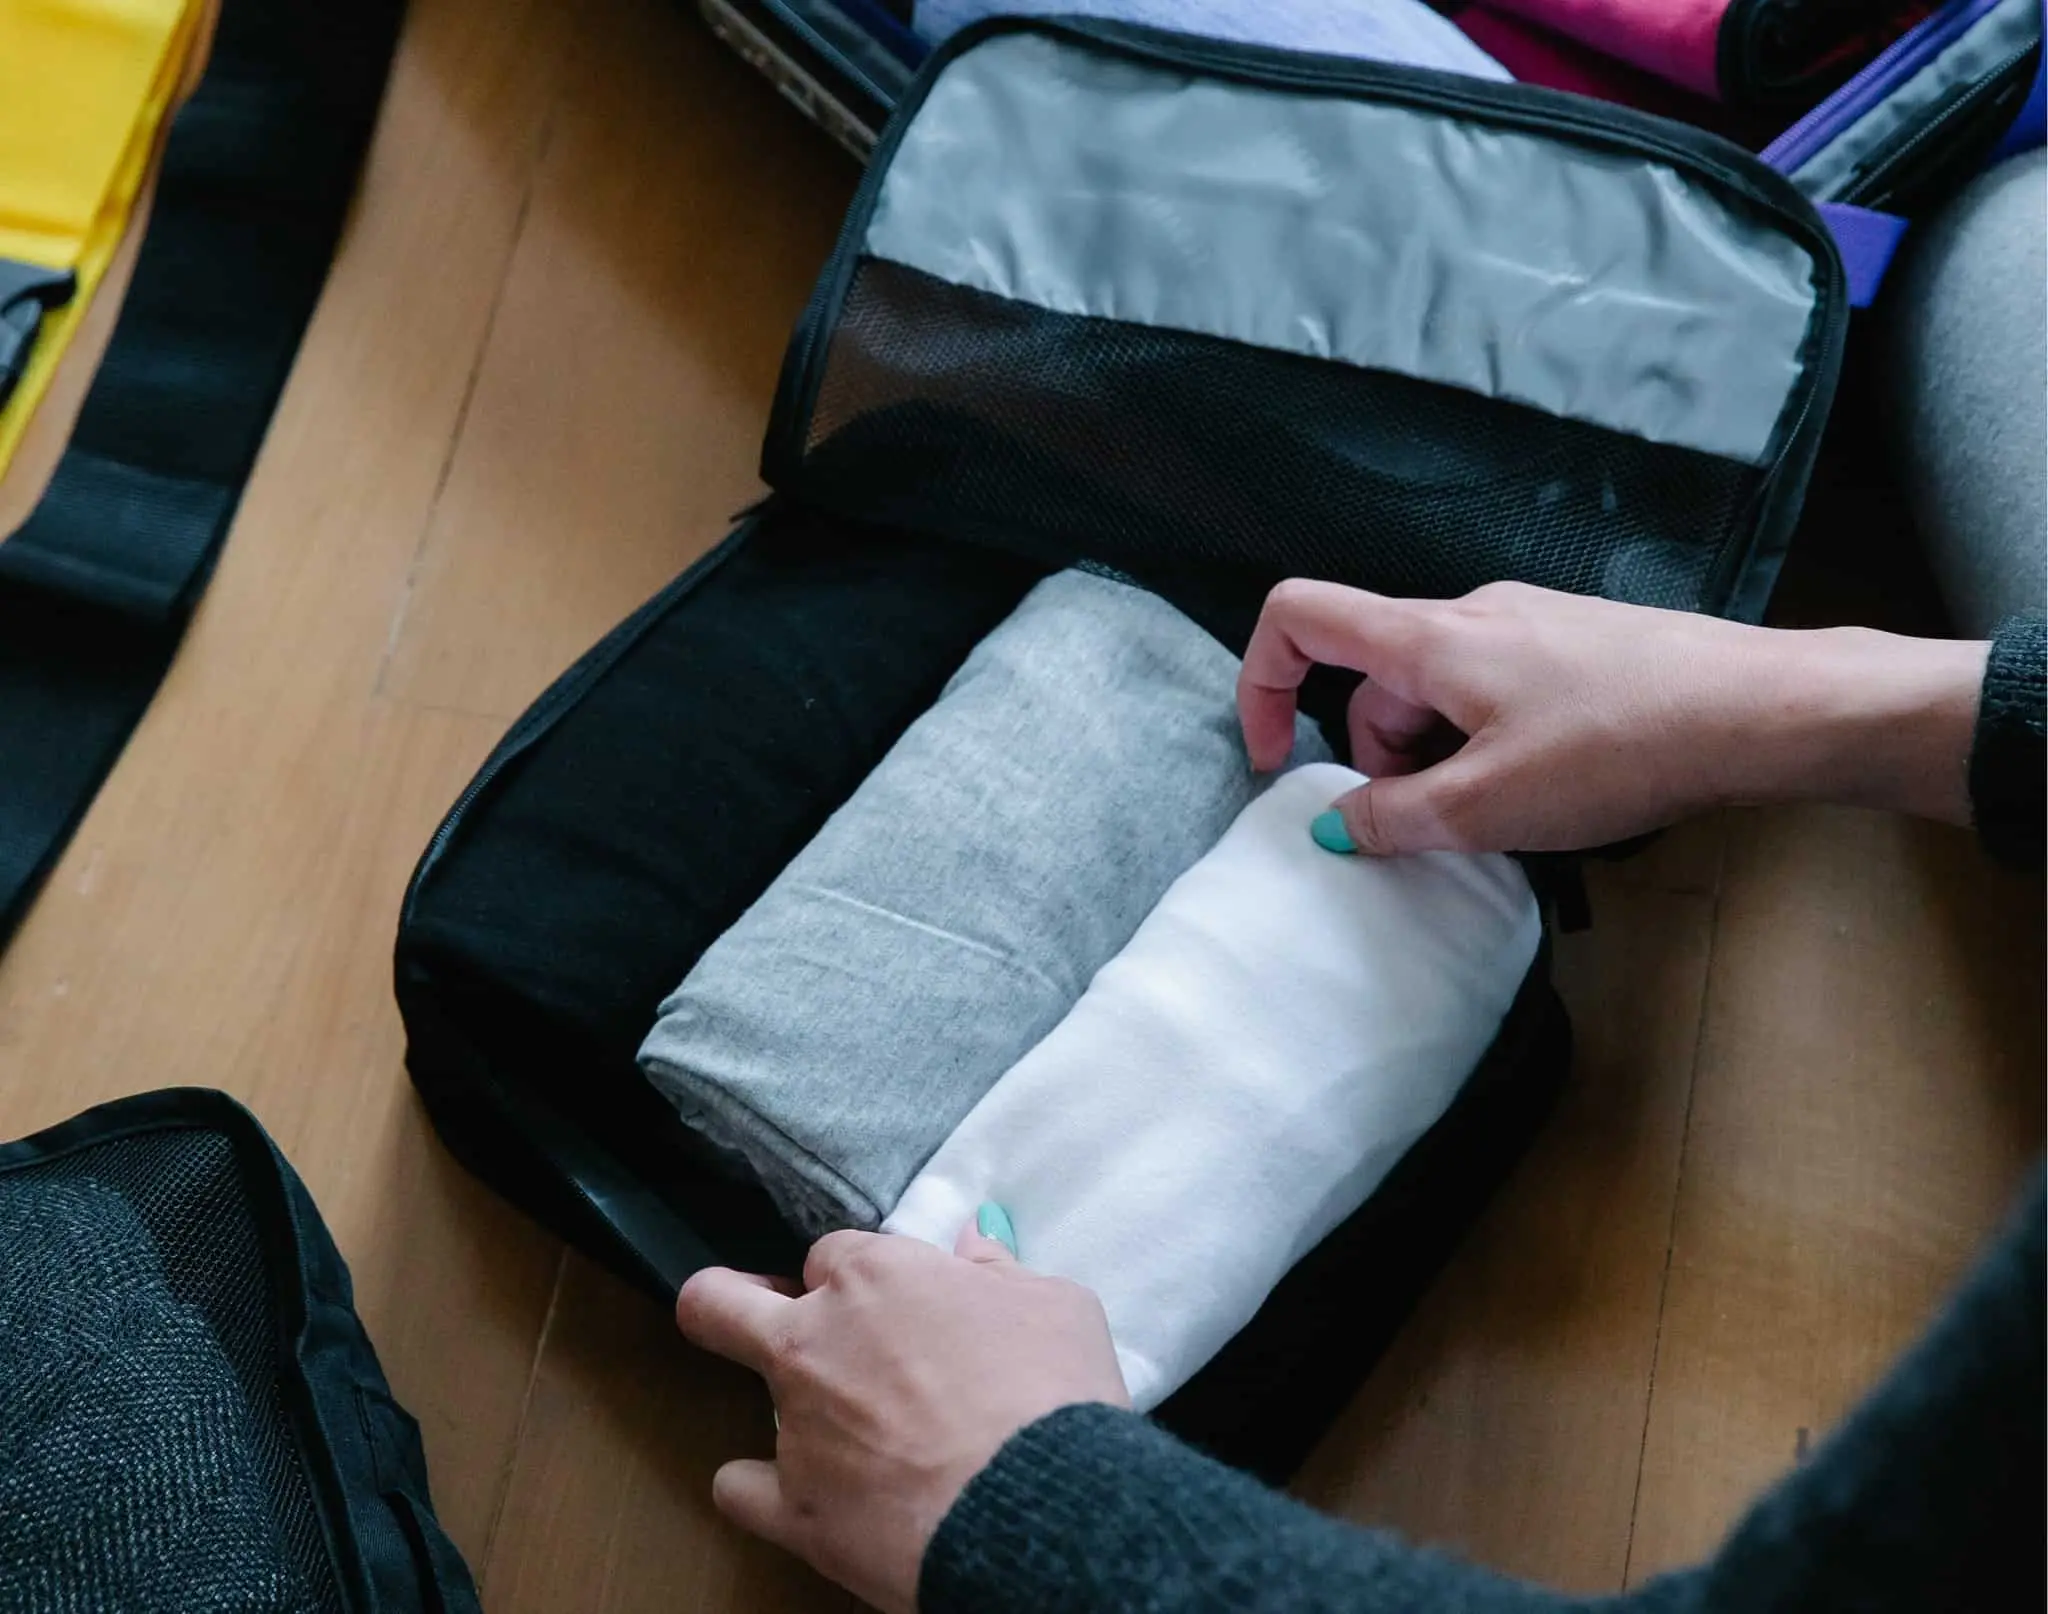 These packing cubes keep your luggage streamlined and organized